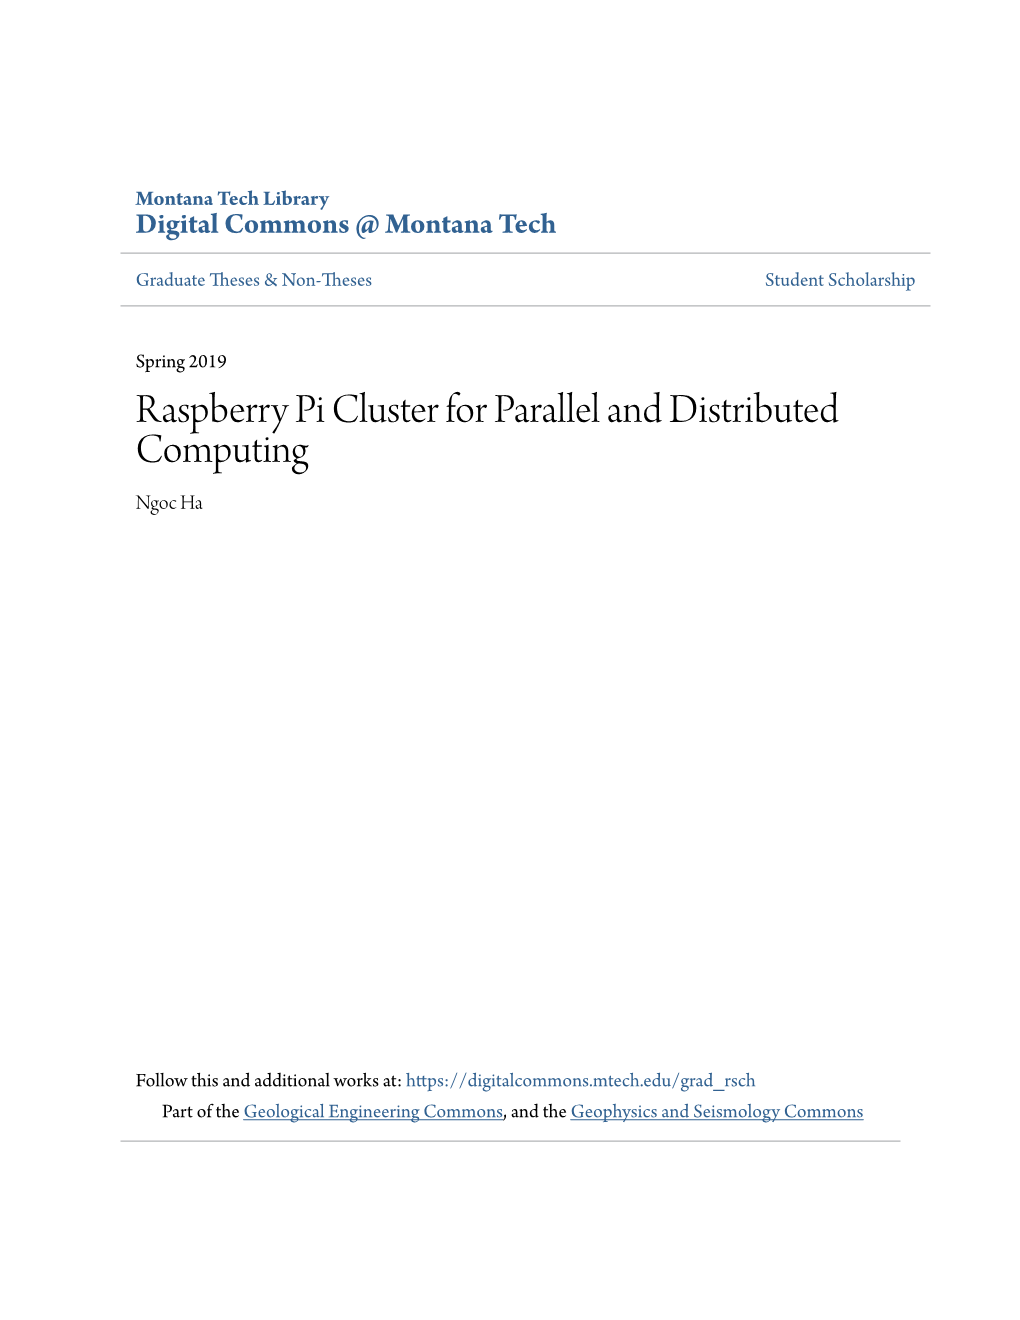 Raspberry Pi Cluster for Parallel and Distributed Computing Ngoc Ha